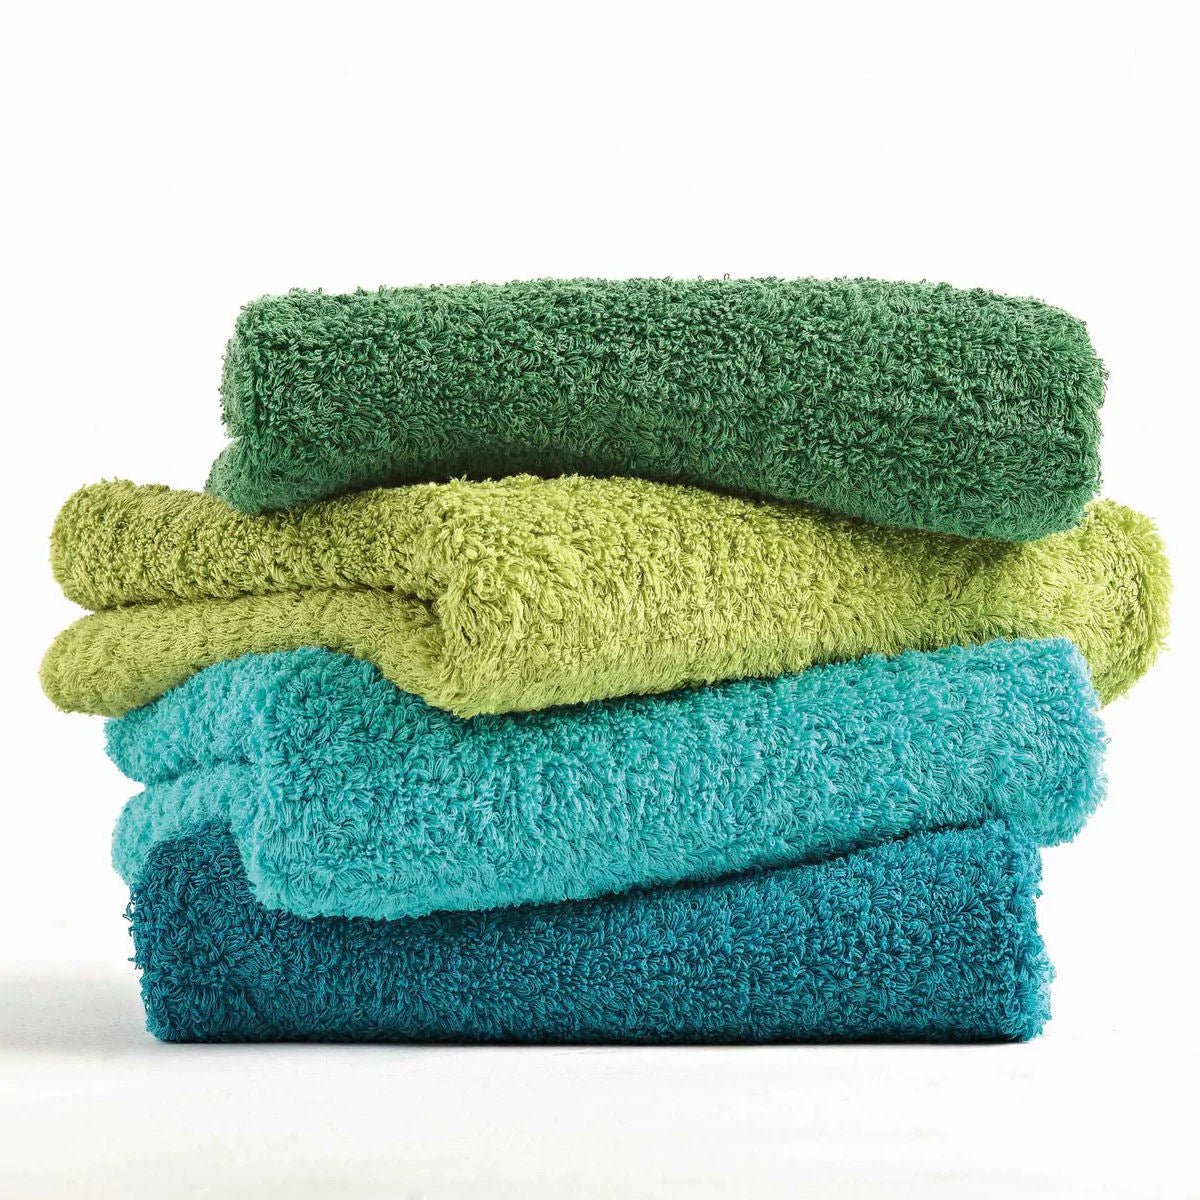 Super Pile Egyptian Cotton Towel by Abyss & Habidecor | 370 Turquoise - |VESIMI Design| Luxury and Rustic bathrooms online